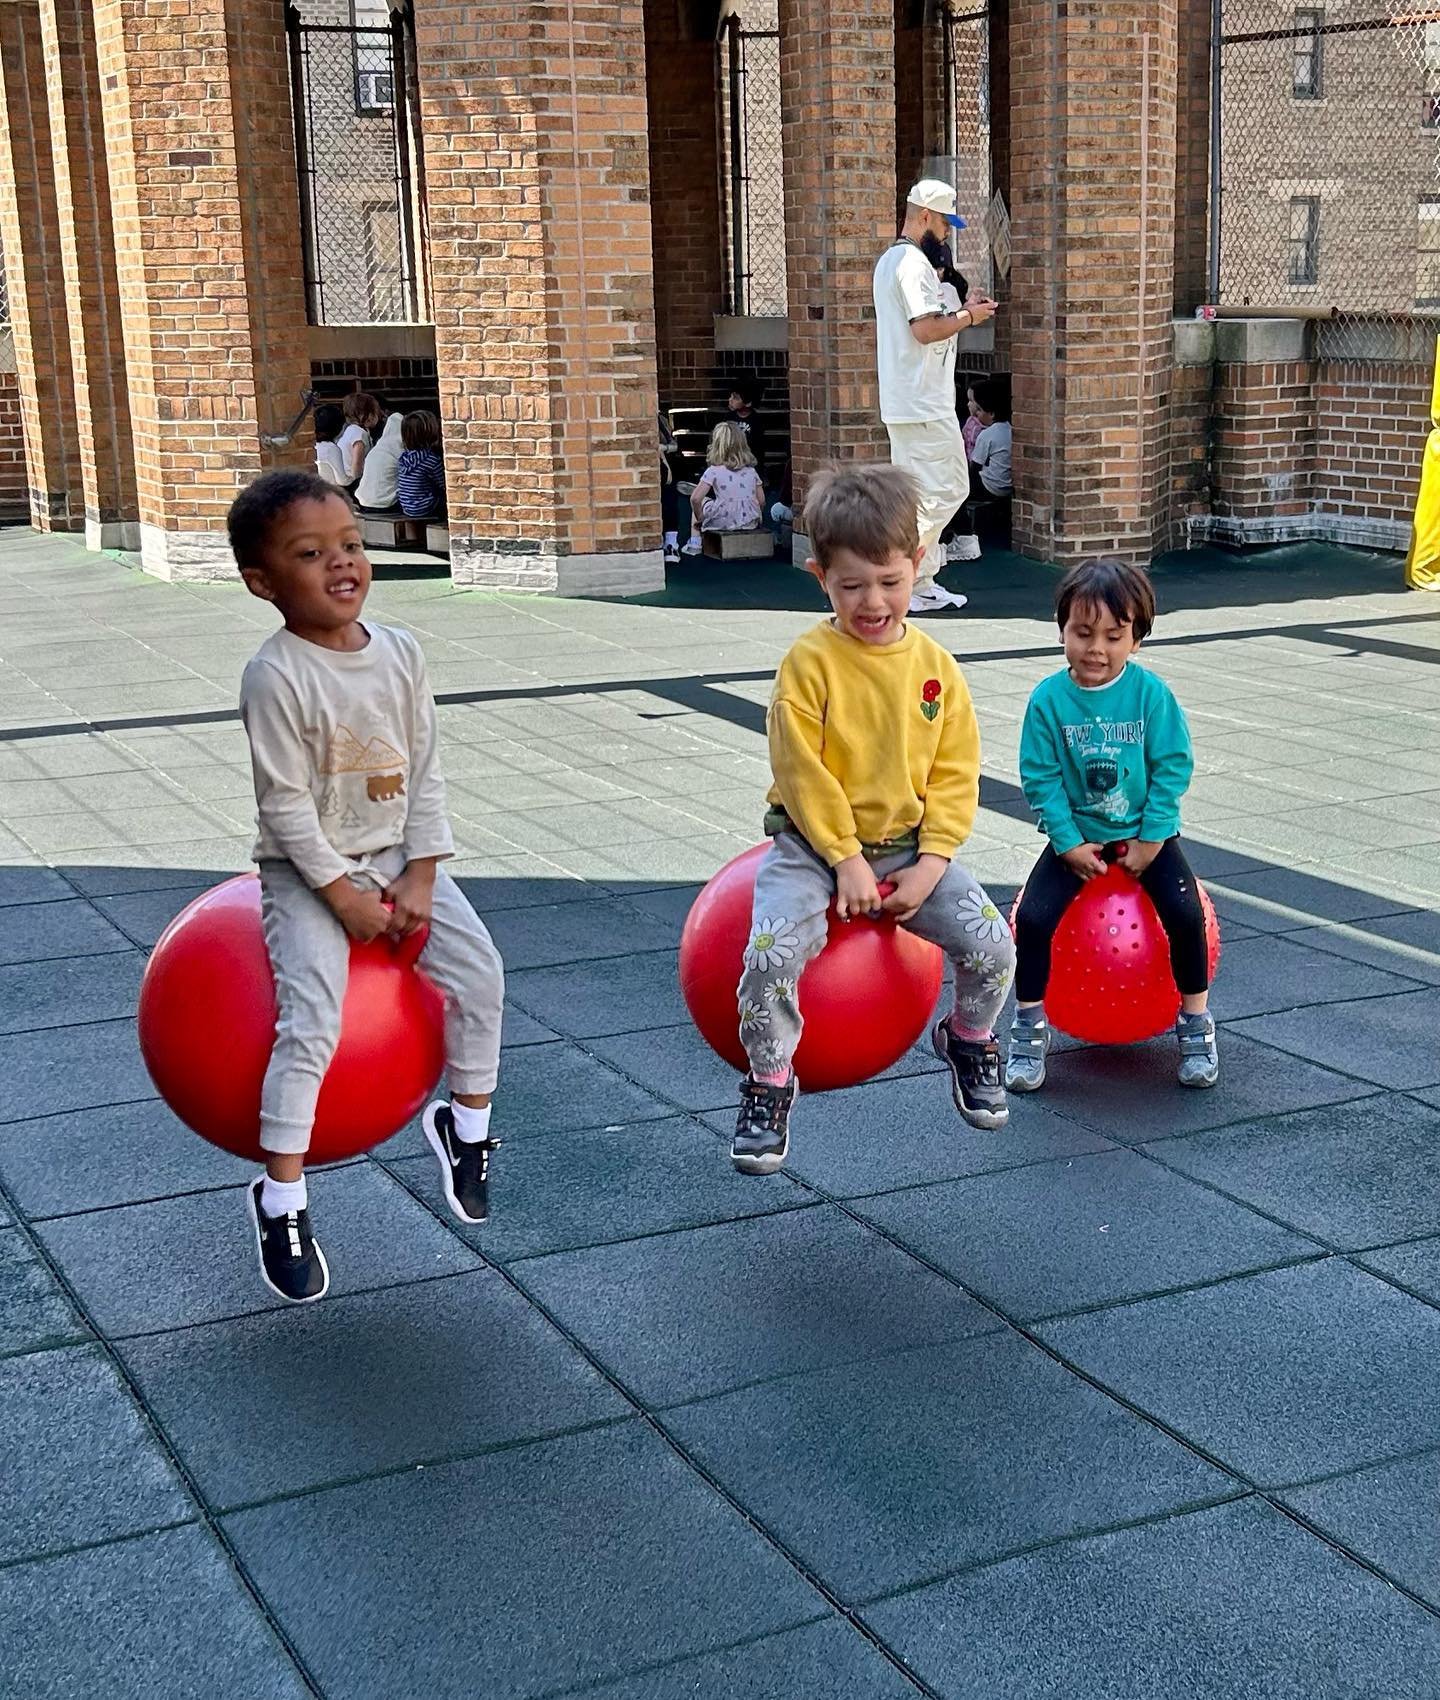 We had a wonderful first week back from spring break! The gorgeous weather meant extended time reconnecting on our terrace, which the children embraced. 

Children in our Blue Class had an exciting circle time in the terrace gazebo! They learned how 